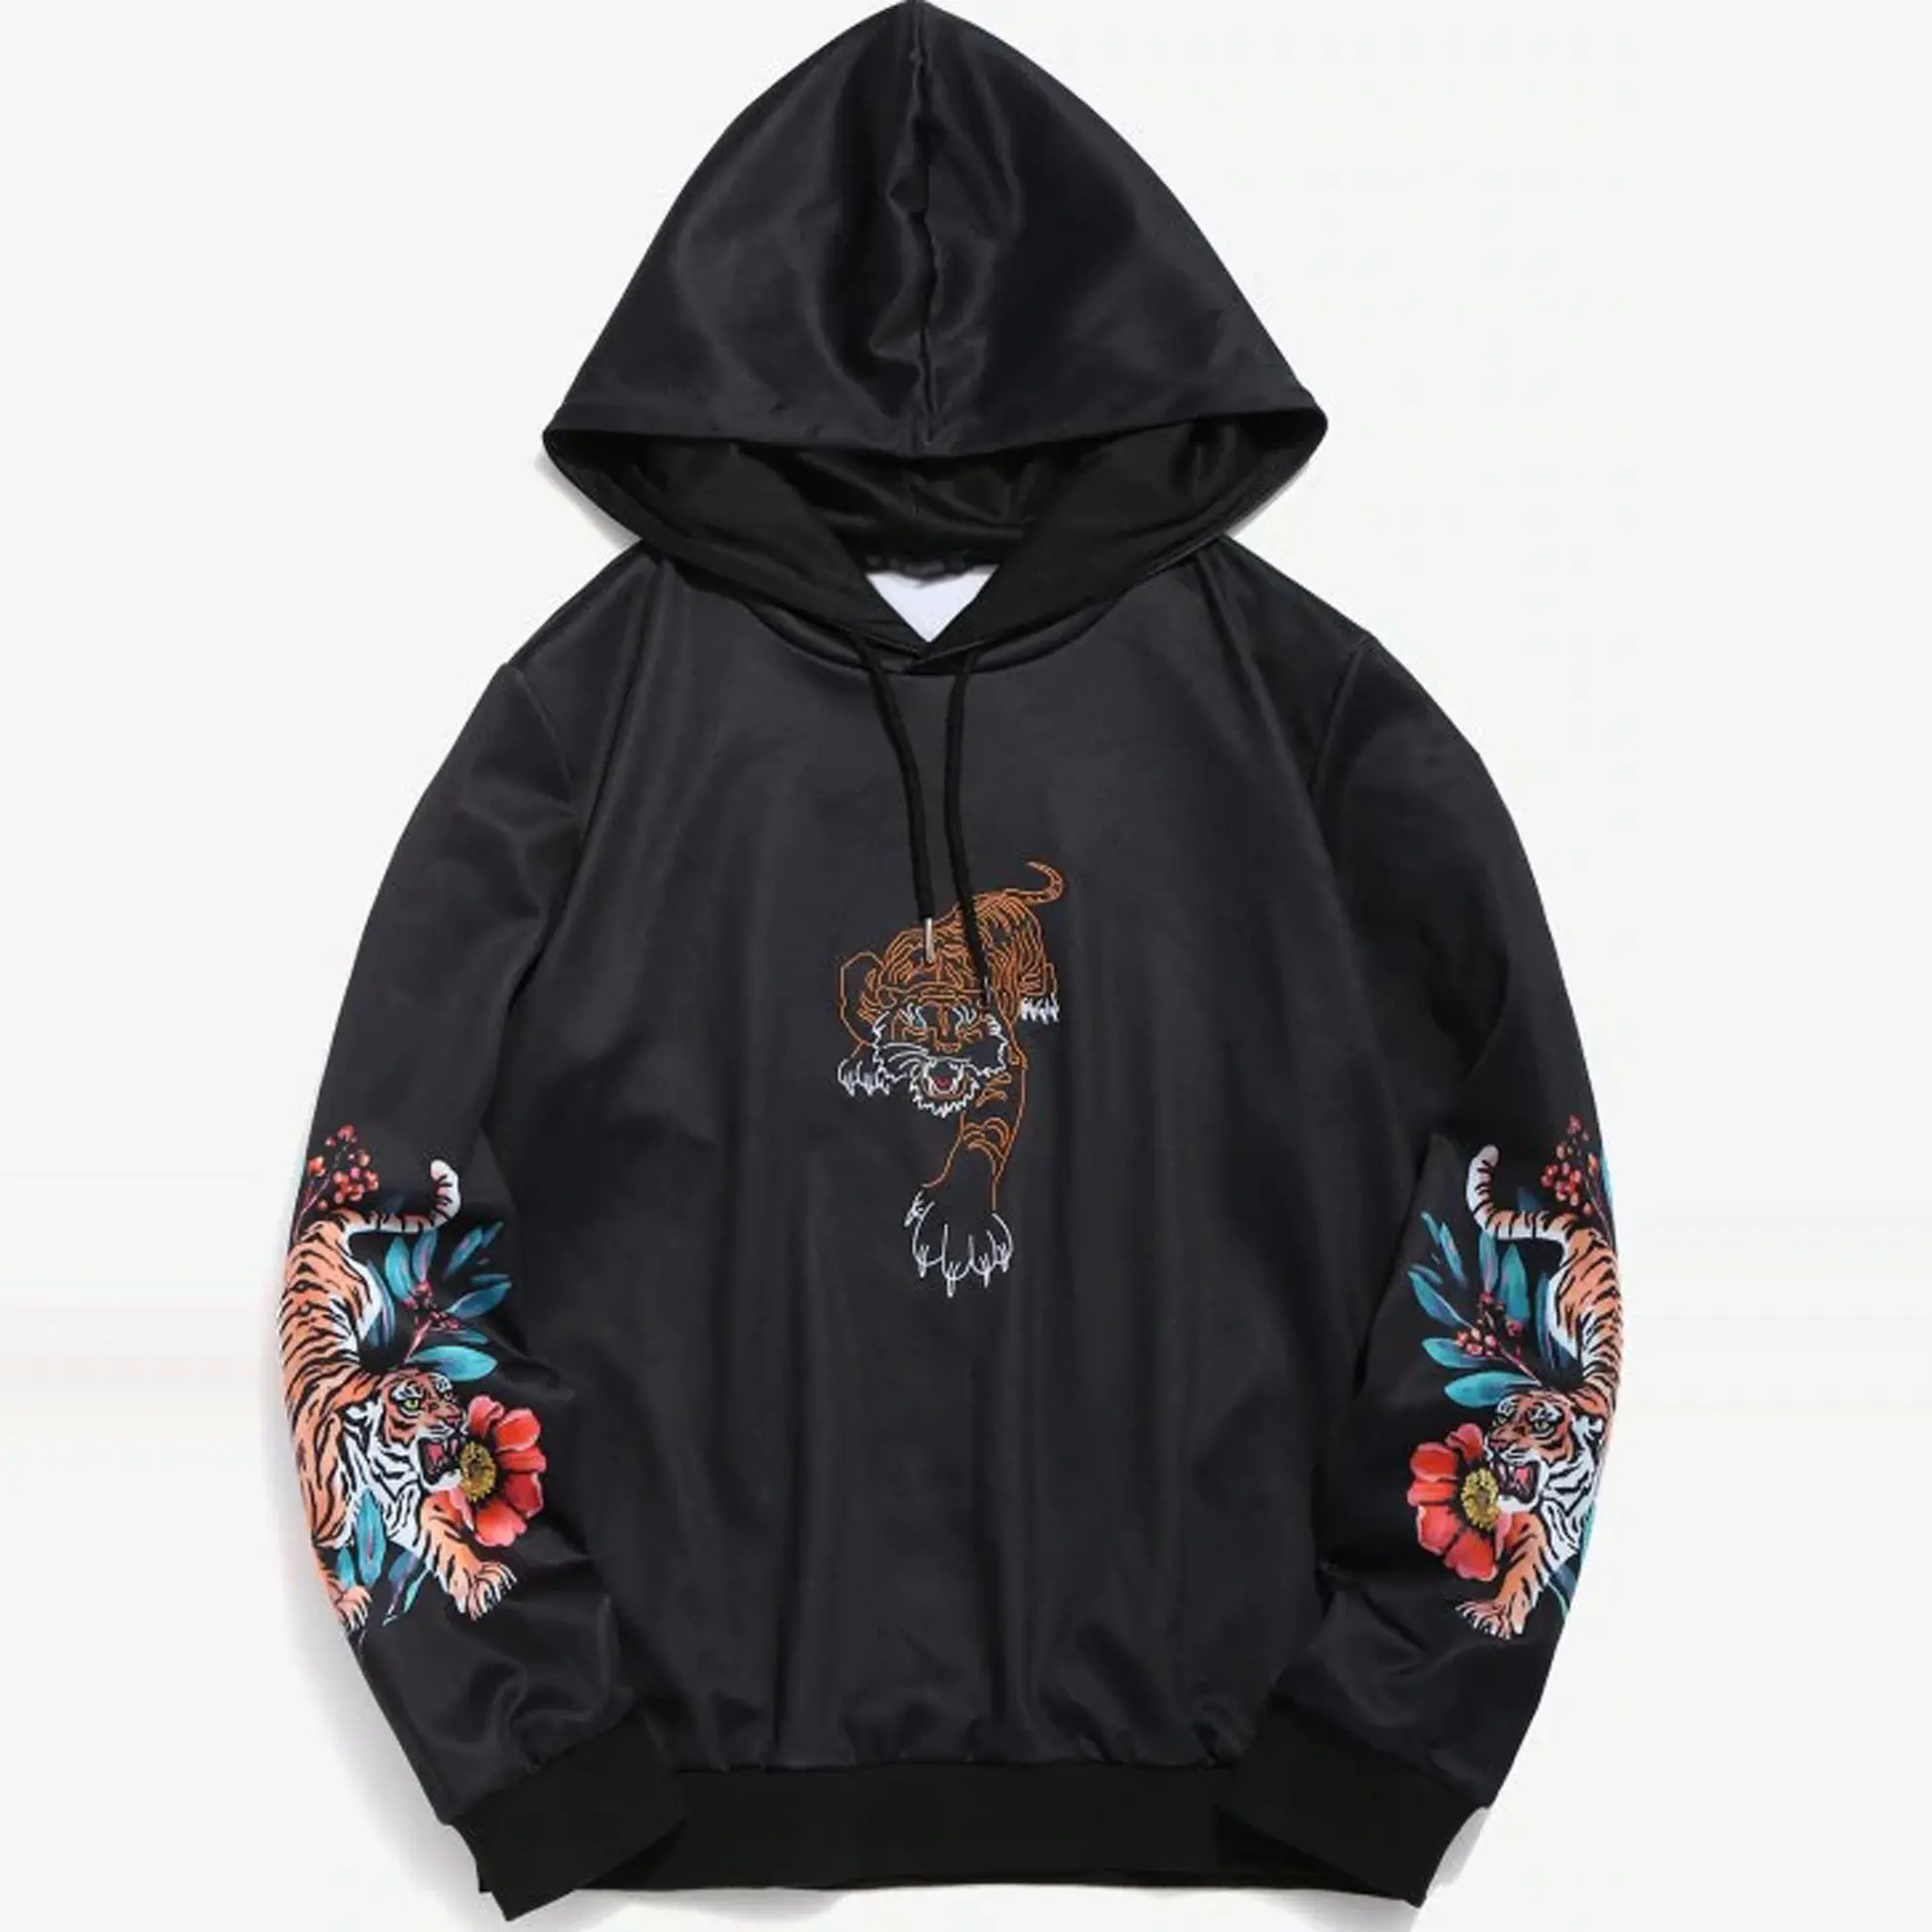 2019 new arrival sweater embroidery black men hoodie with tiger print